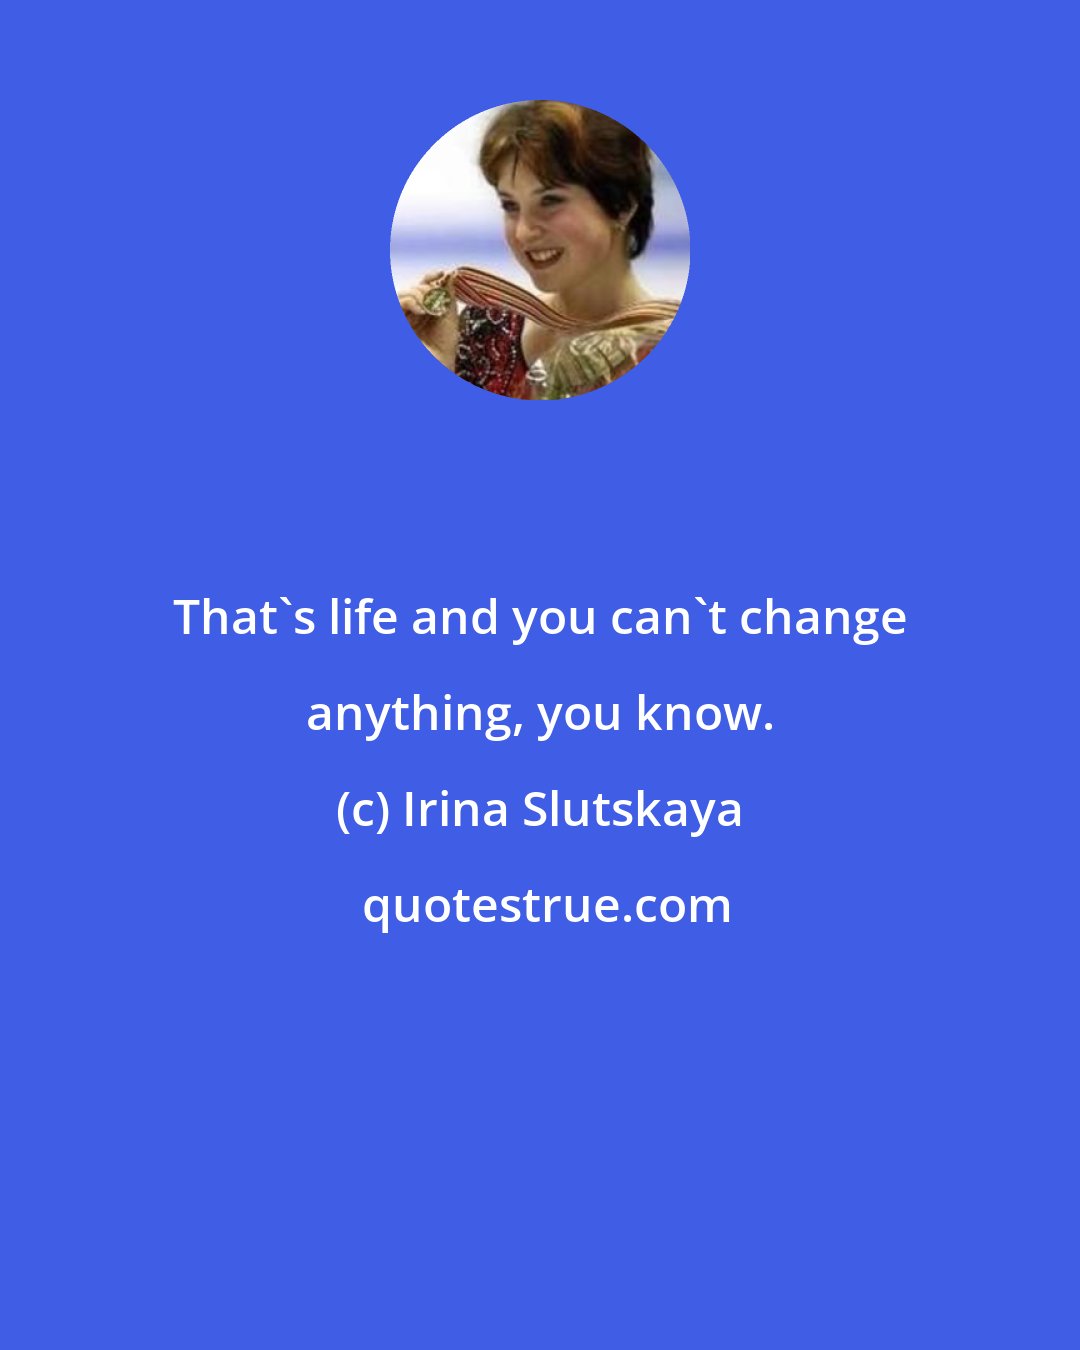 Irina Slutskaya: That's life and you can't change anything, you know.